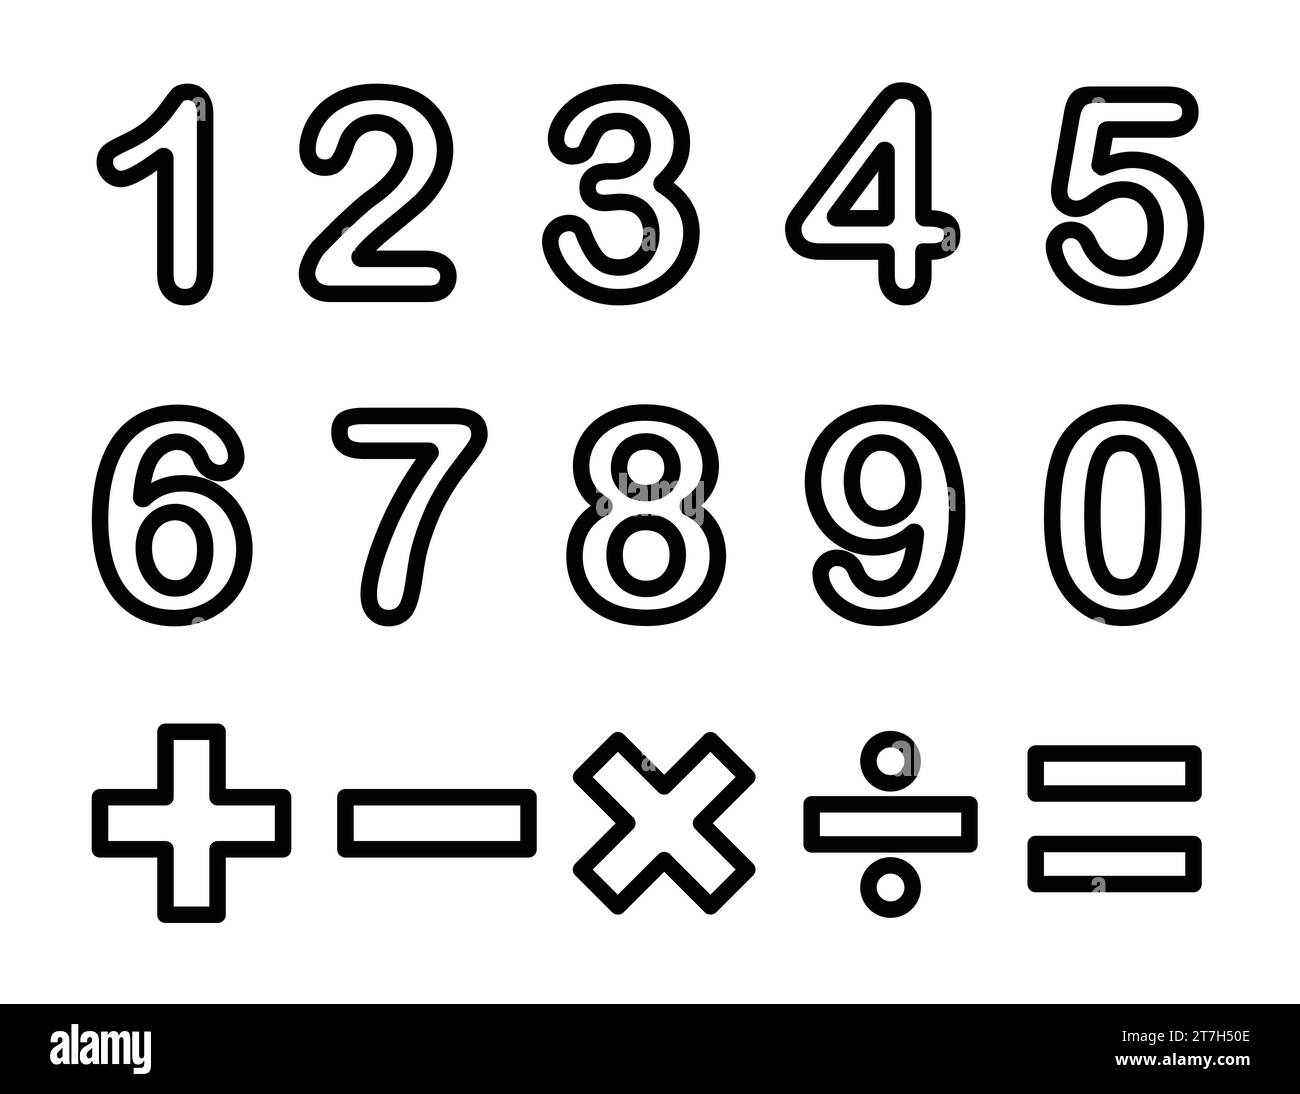 Numbers And Mathematics Symbols Coloring Page For Children Stock Vector